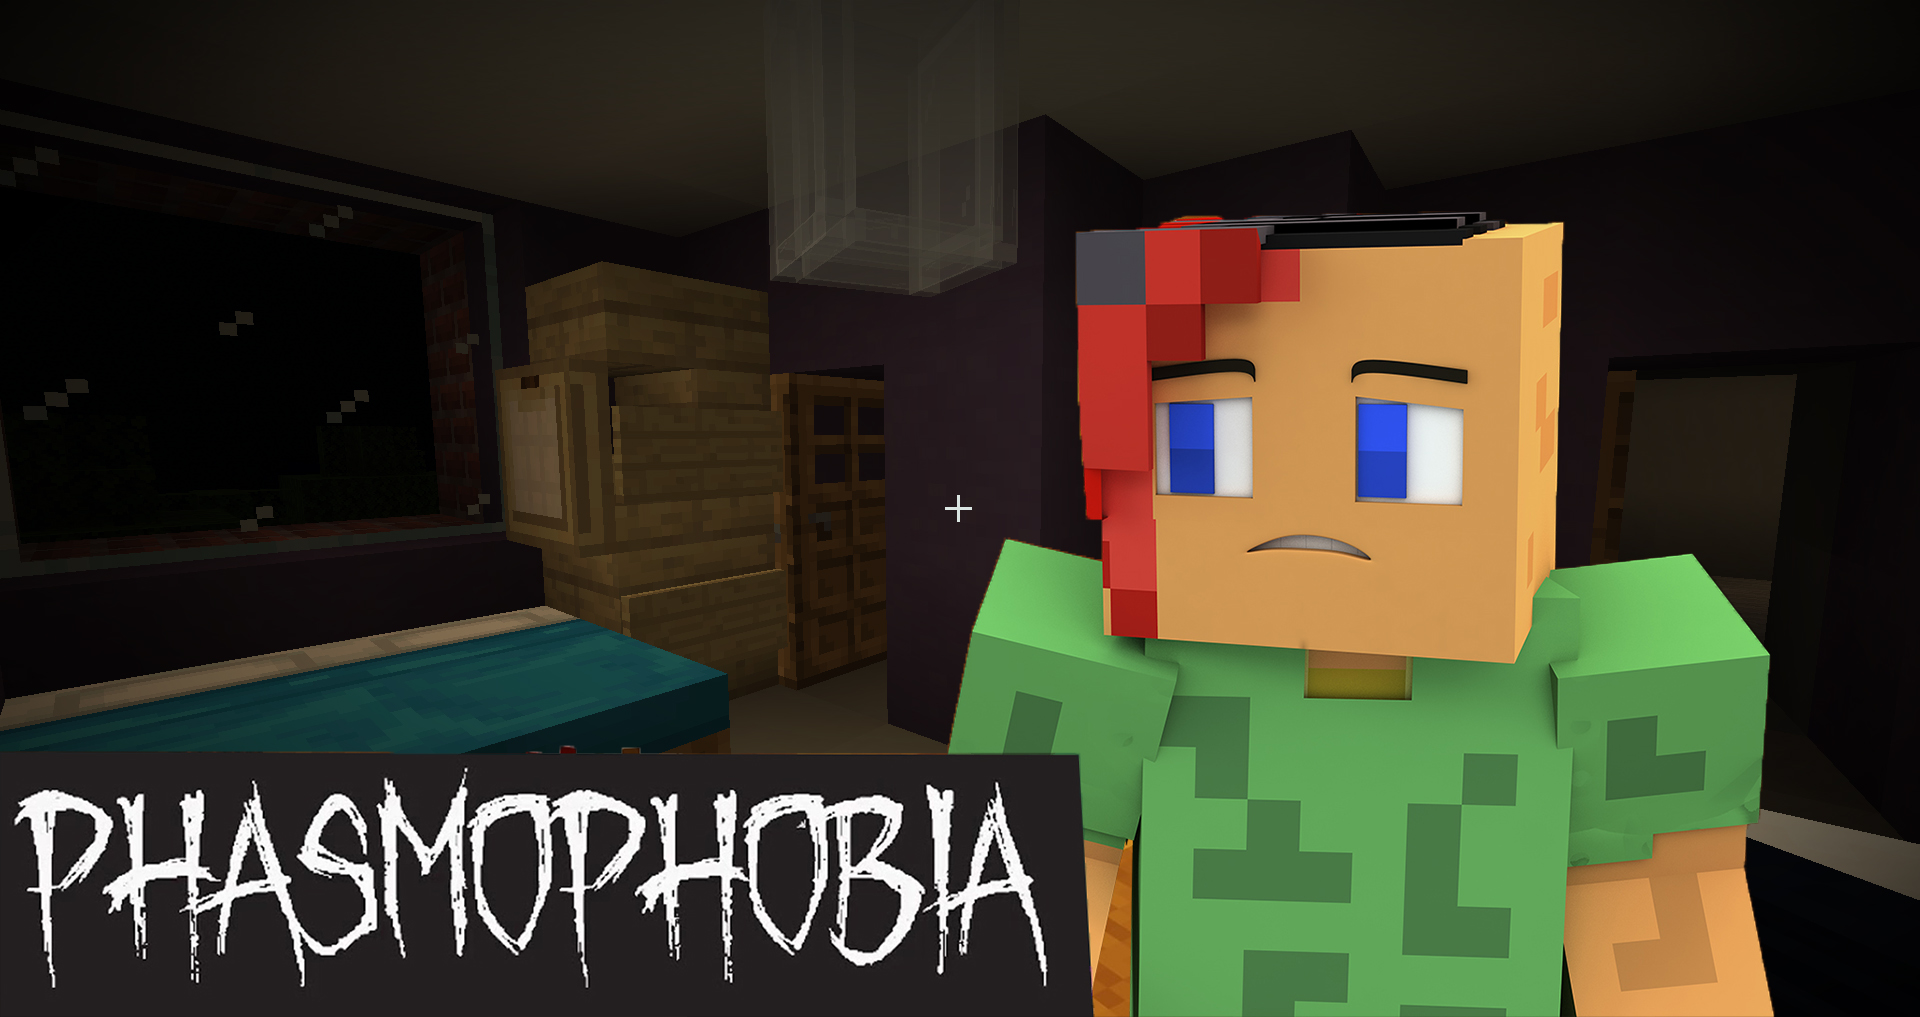 Phasmophobia in minecraft by neomc фото 59